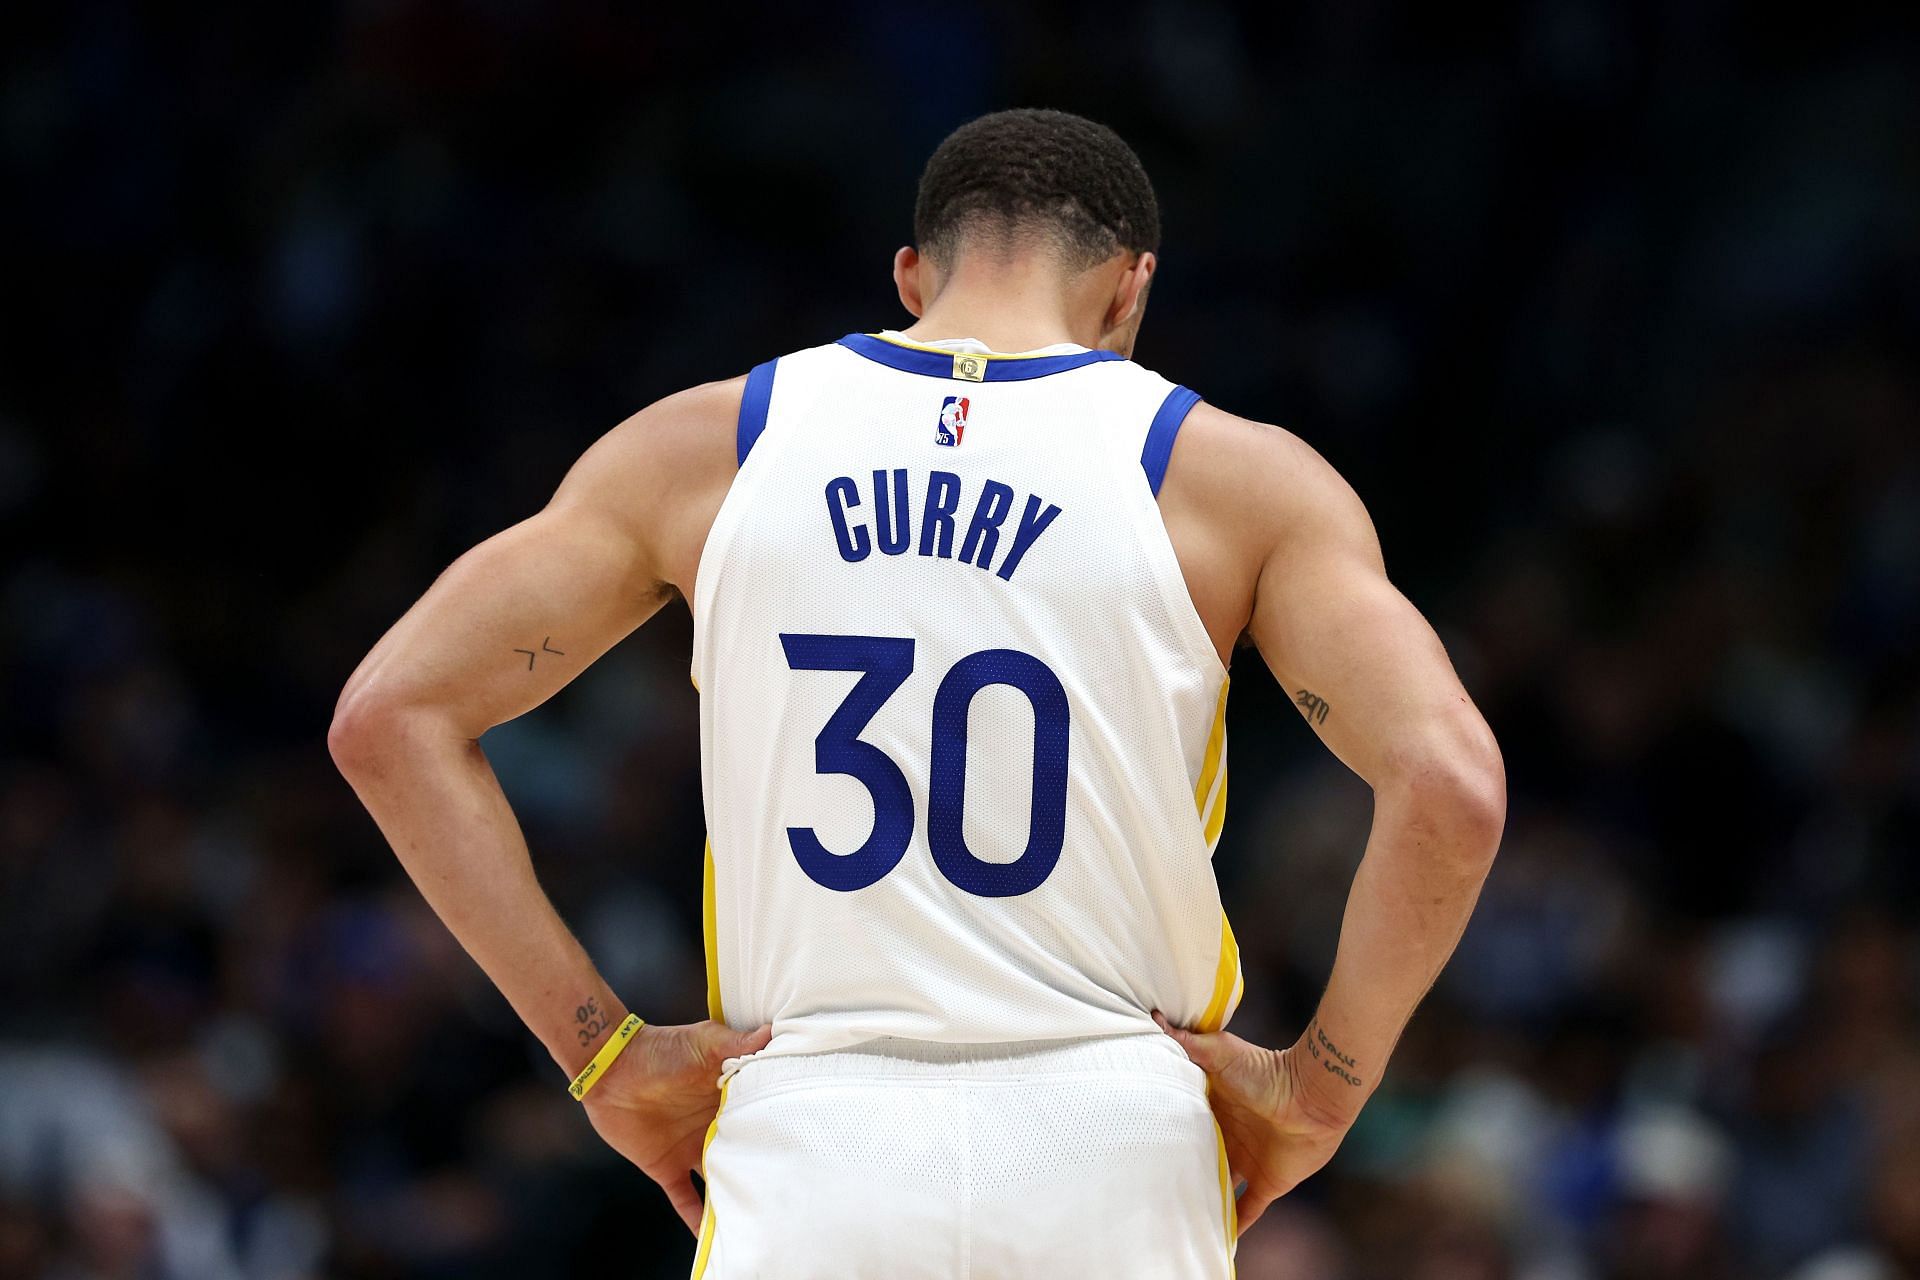 Stephen Curry led the Warriors with 31 points and 11 assists. Andrew Wiggins chipped in with 27 points and 11 rebounds and Klay Thompson added 19 points to the tally.